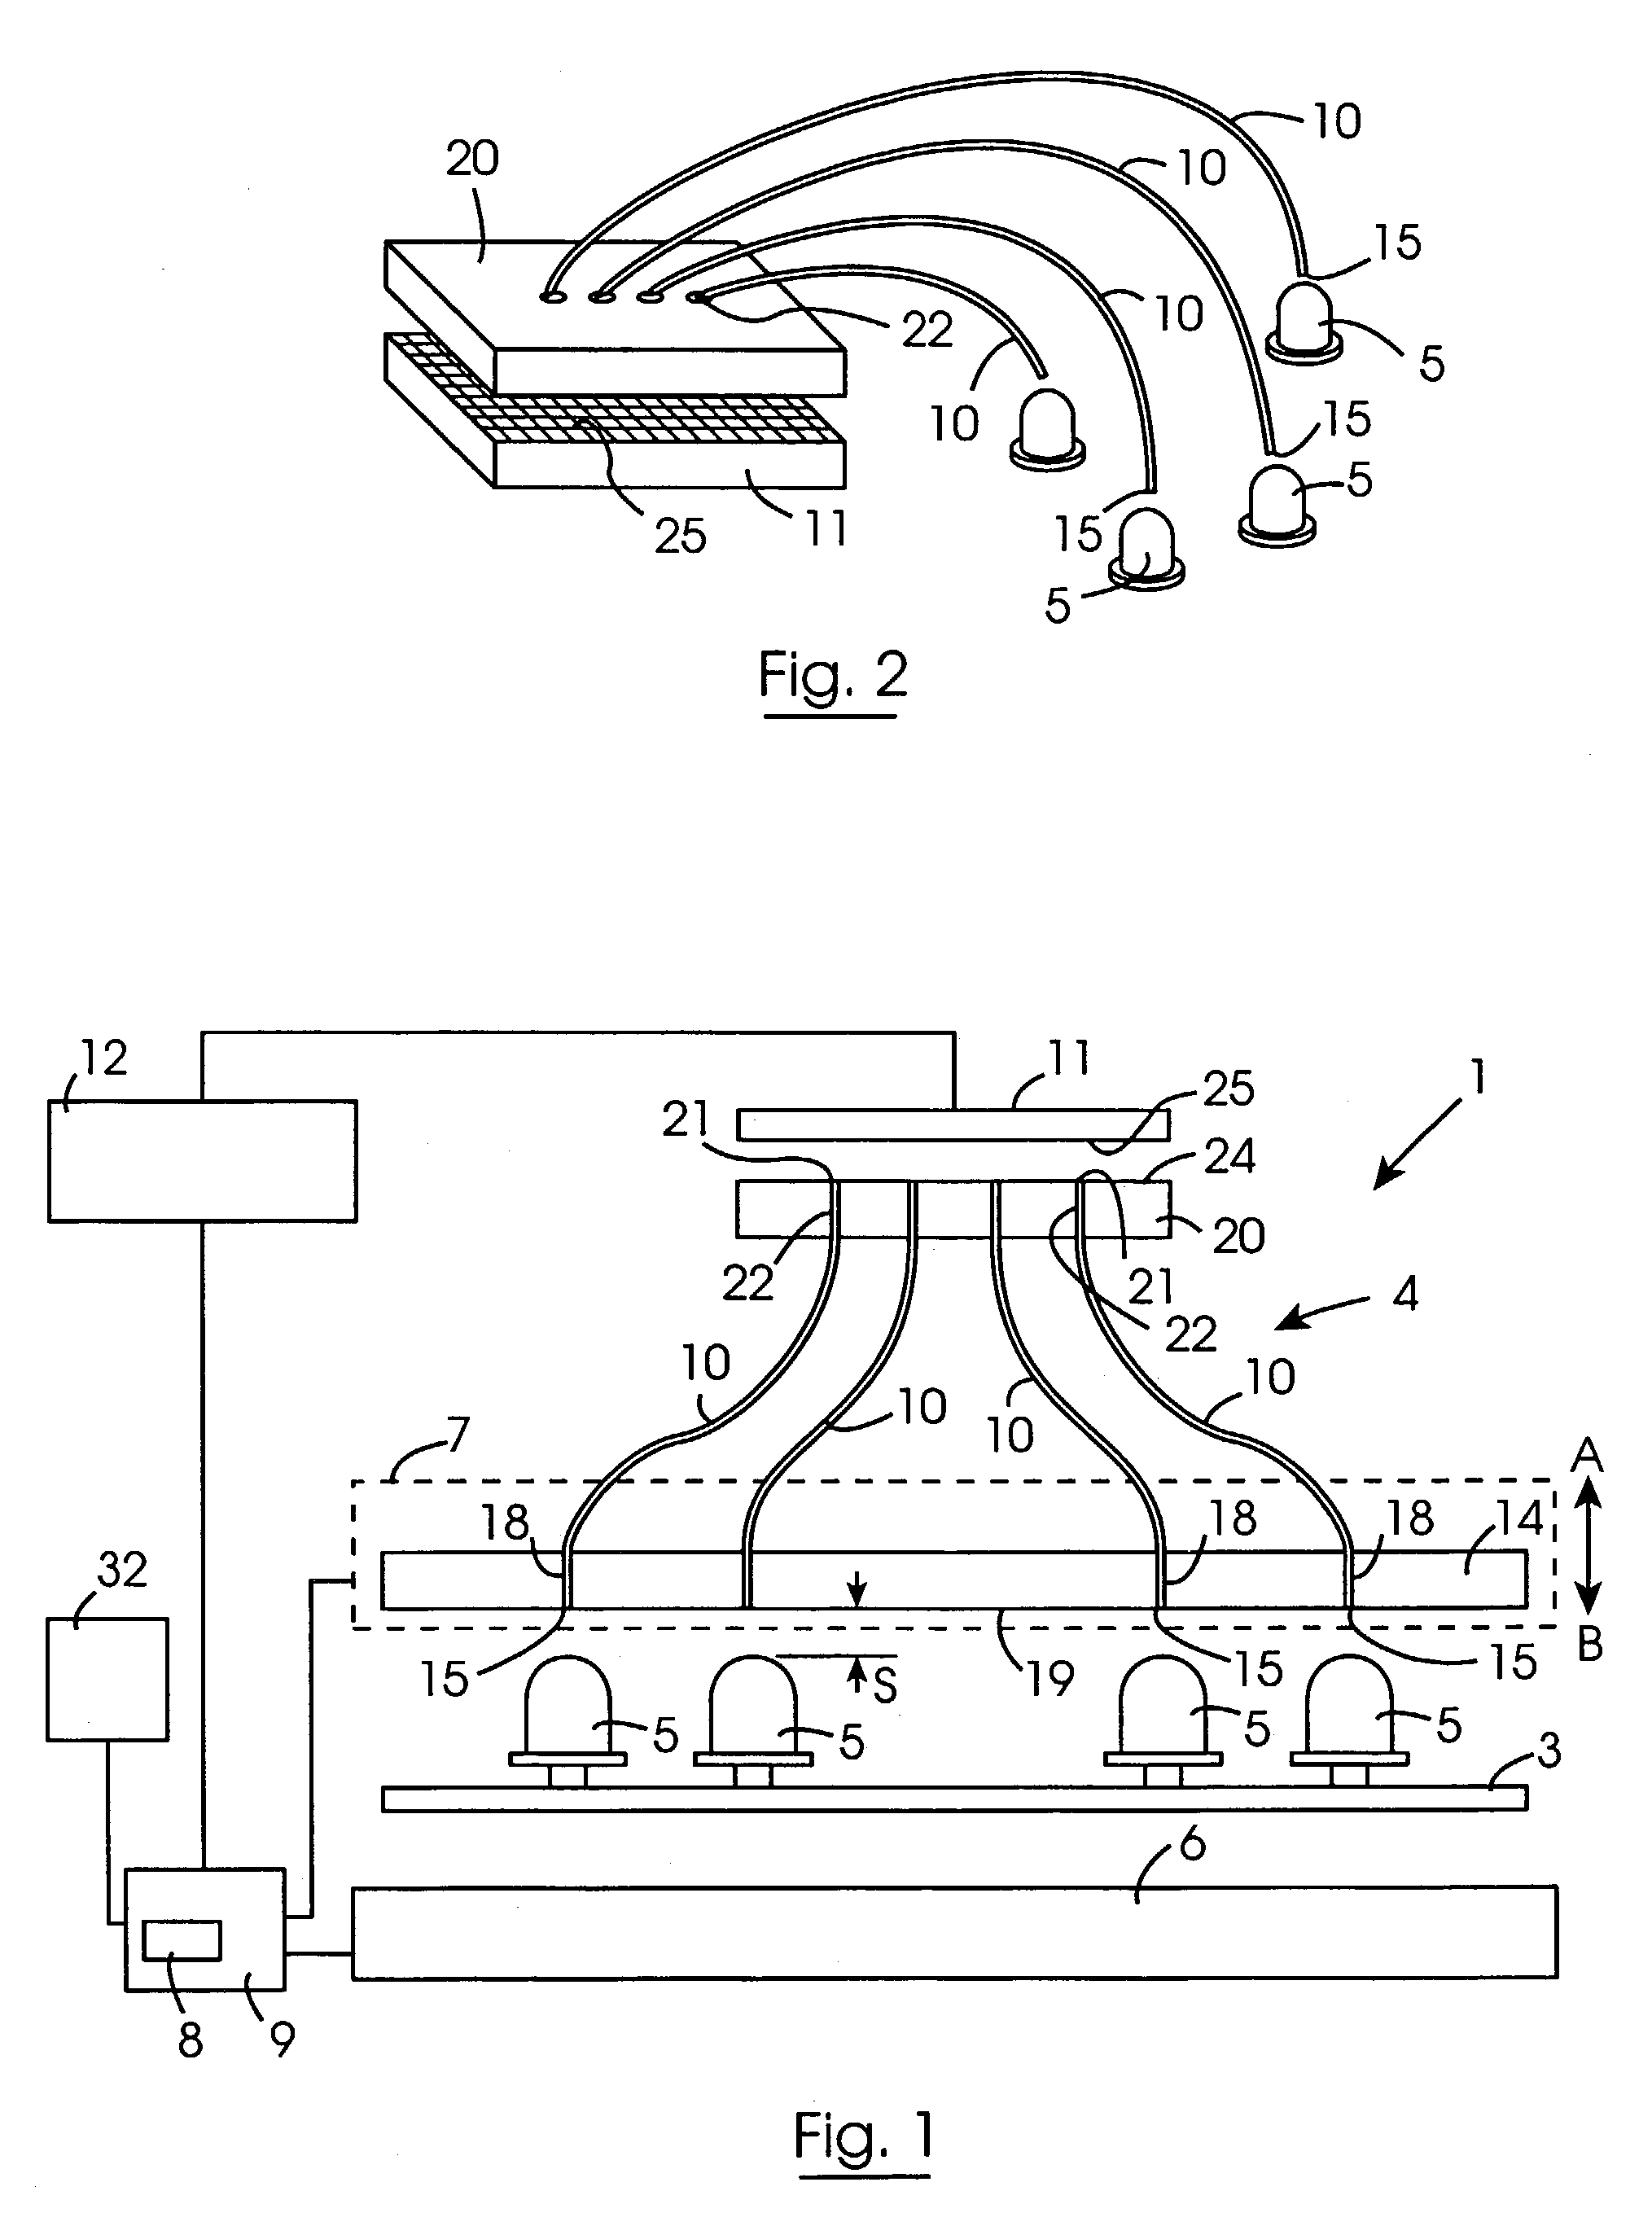 Apparatus for testing a light emitting device, and a method for testing light emitting devices